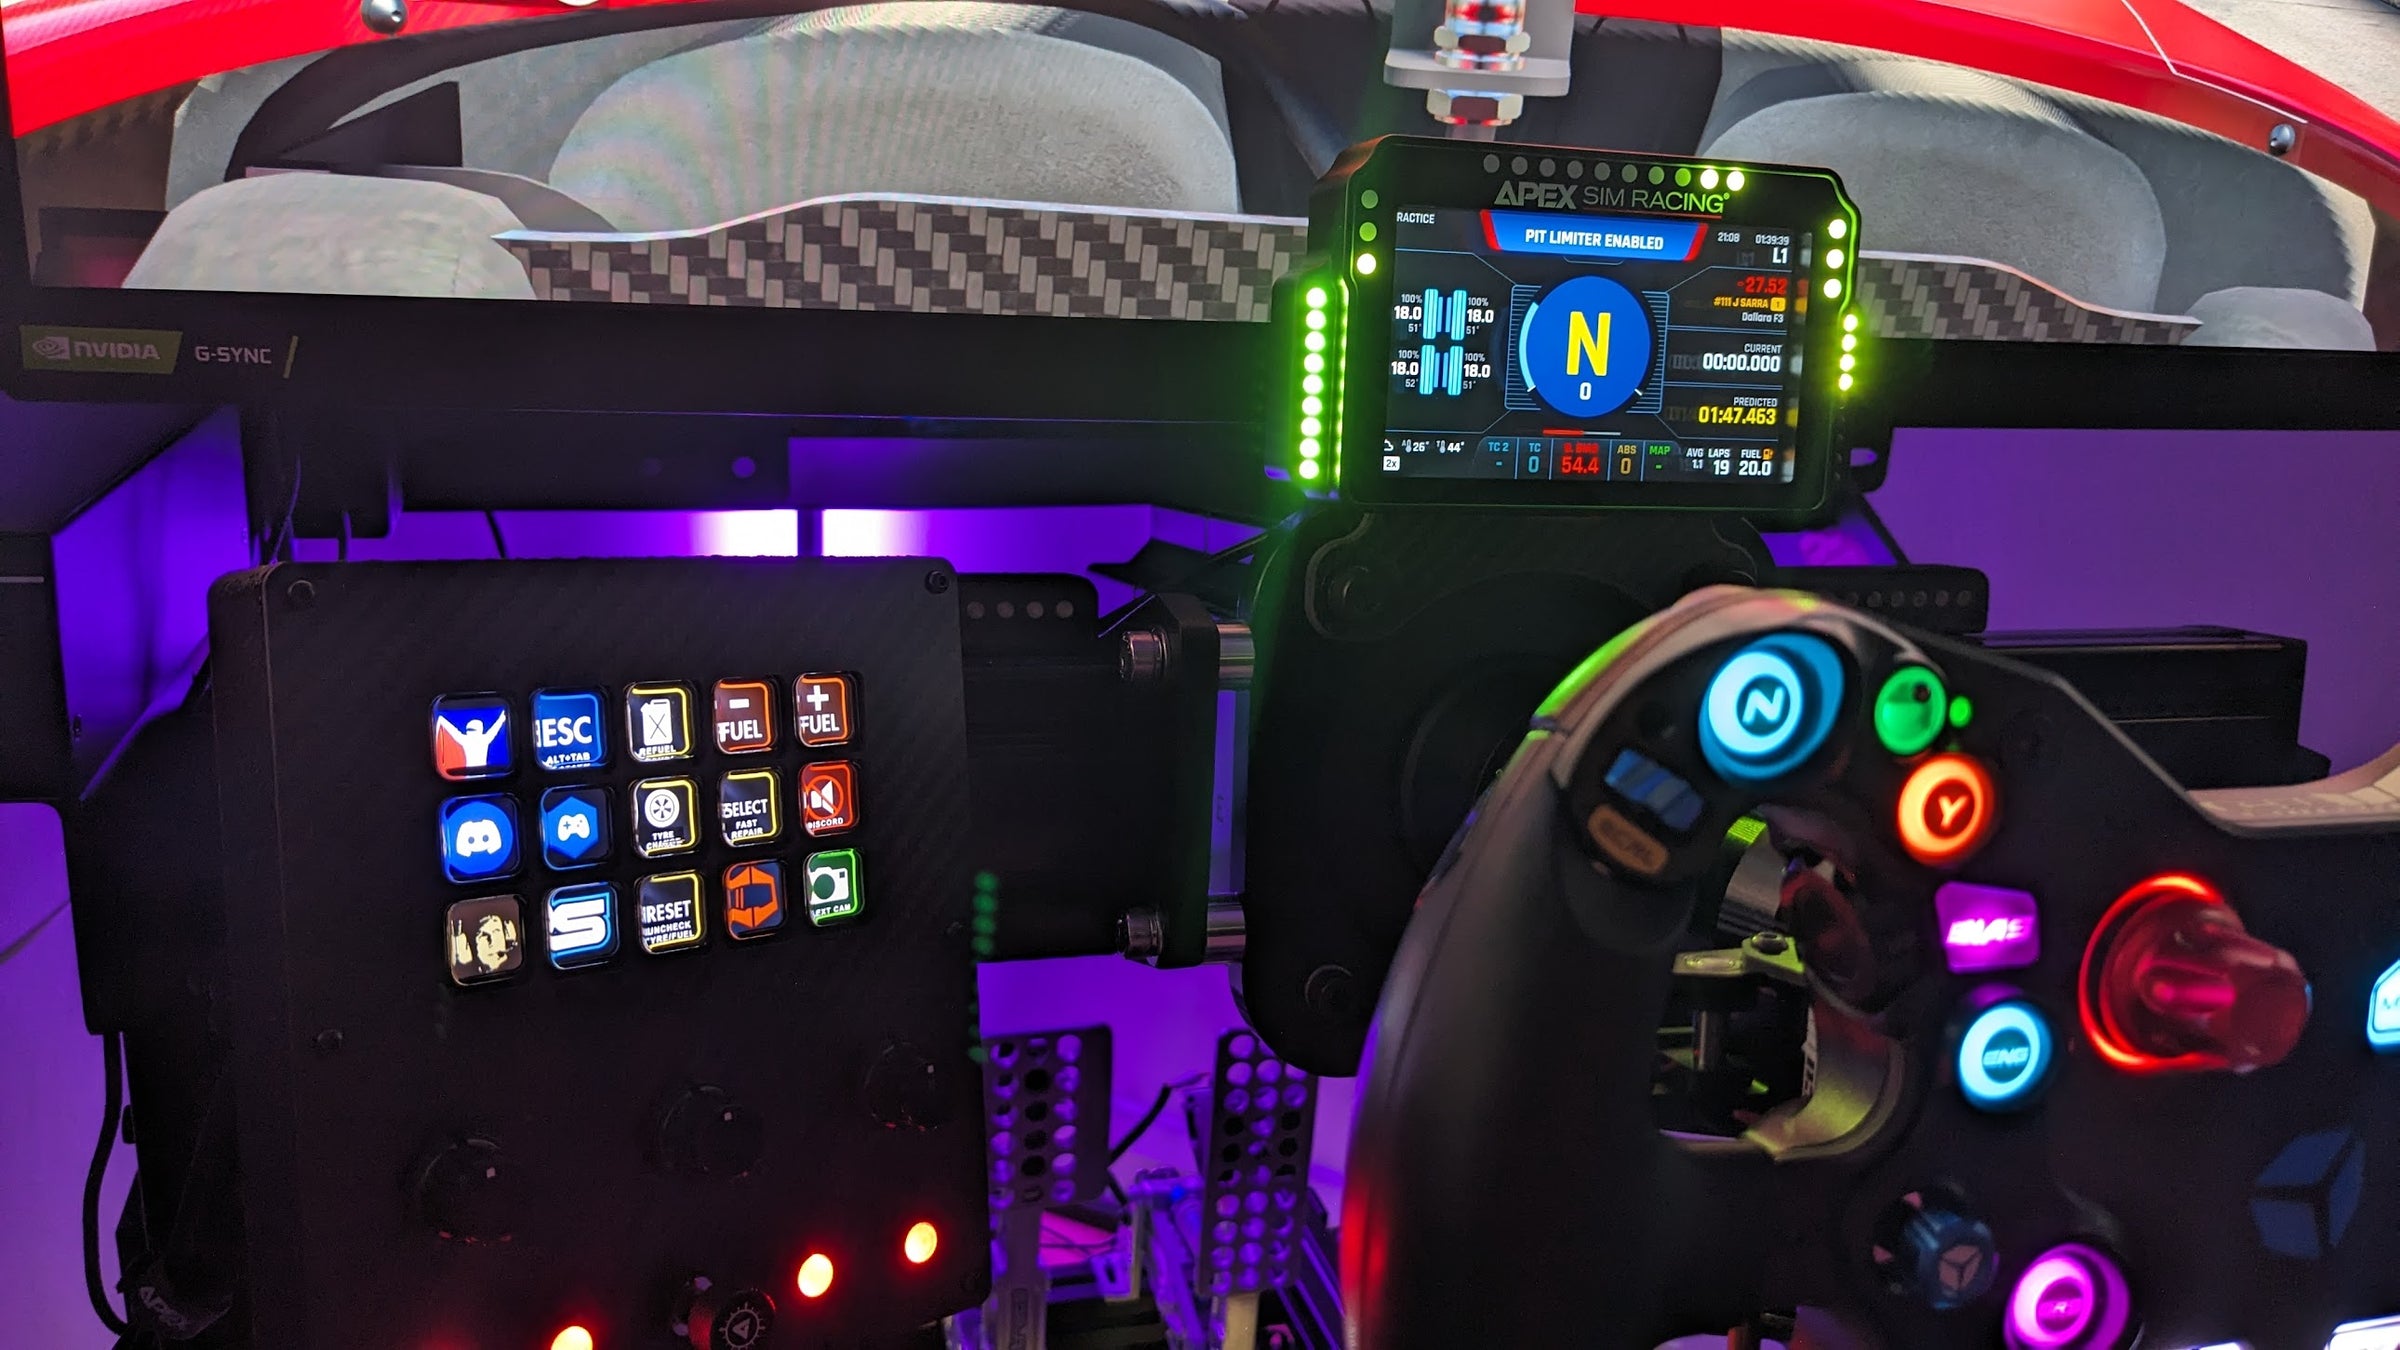 Sim Racing Rig with Apex Sim Racing Race deck button box and Gt3r racing display (ddu) and Cube Controls Fpro